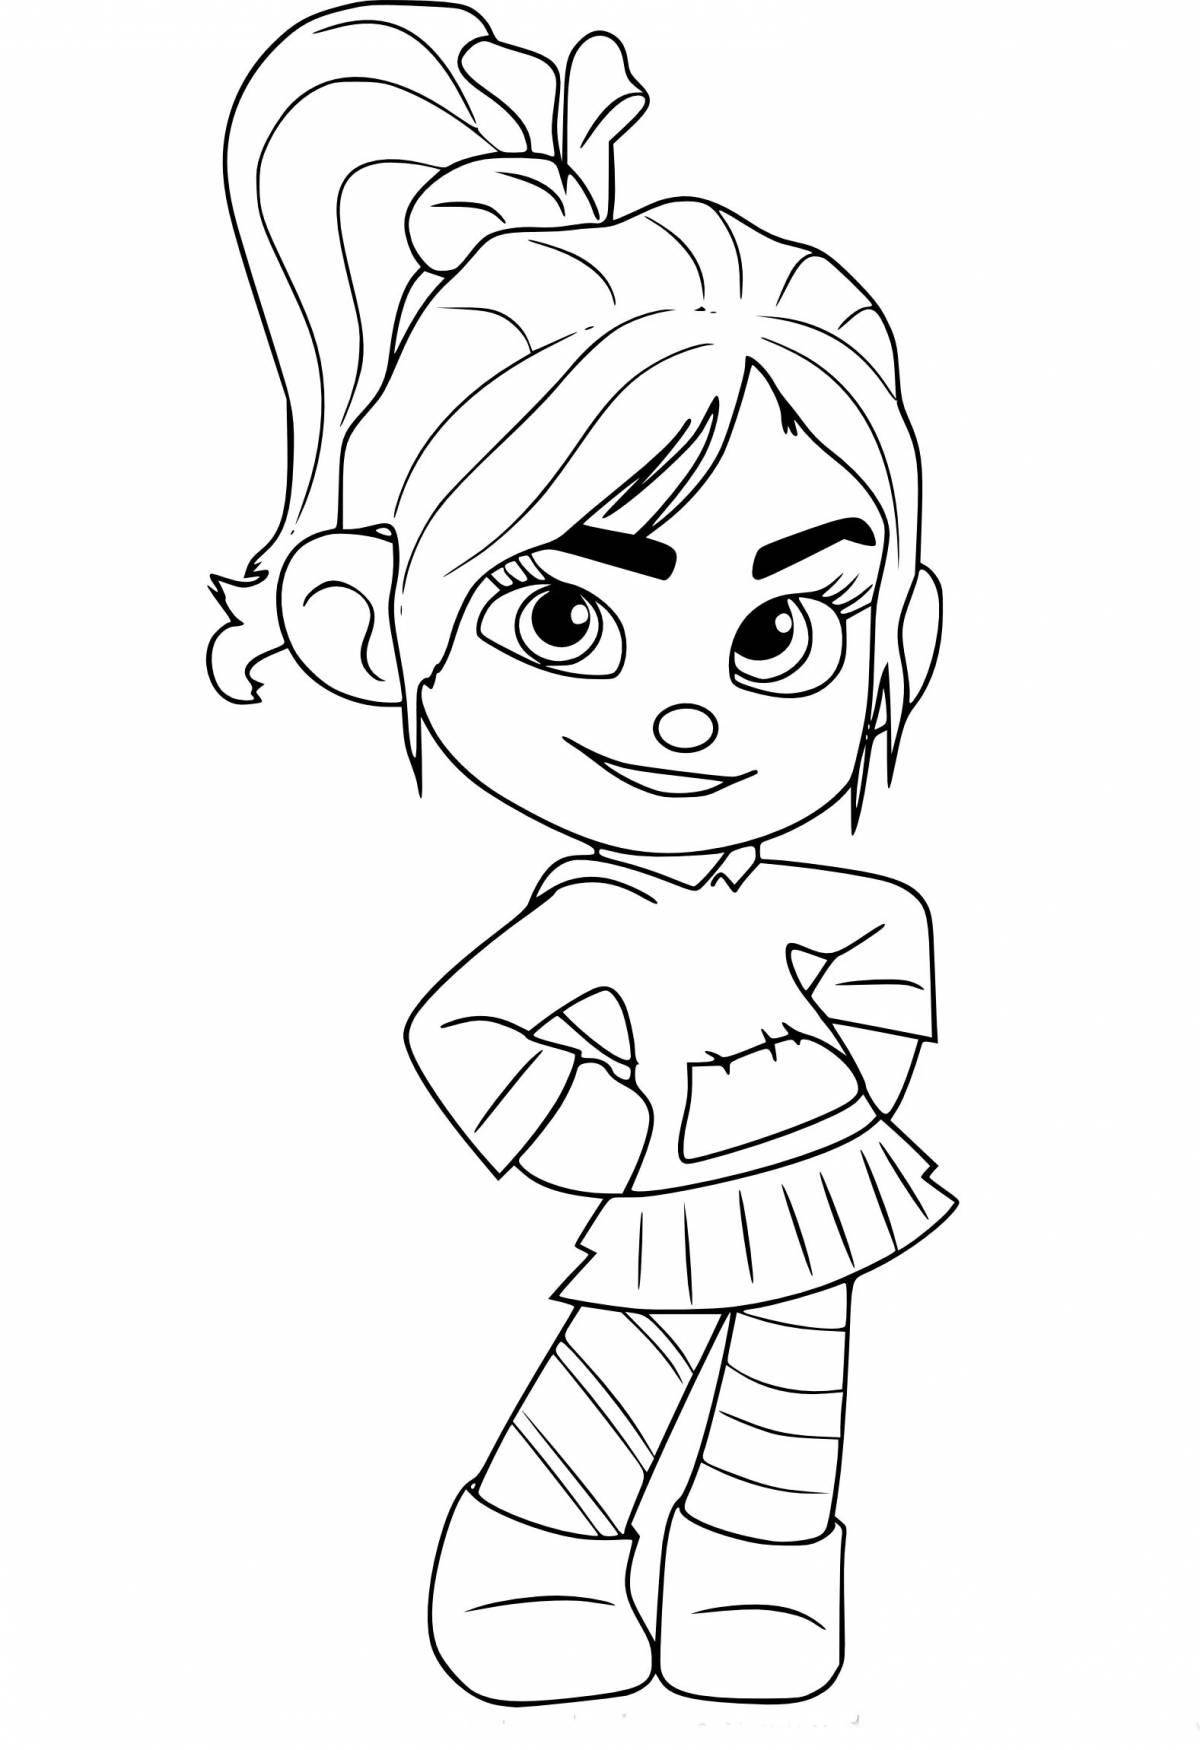 Vanellope and ralph coloring